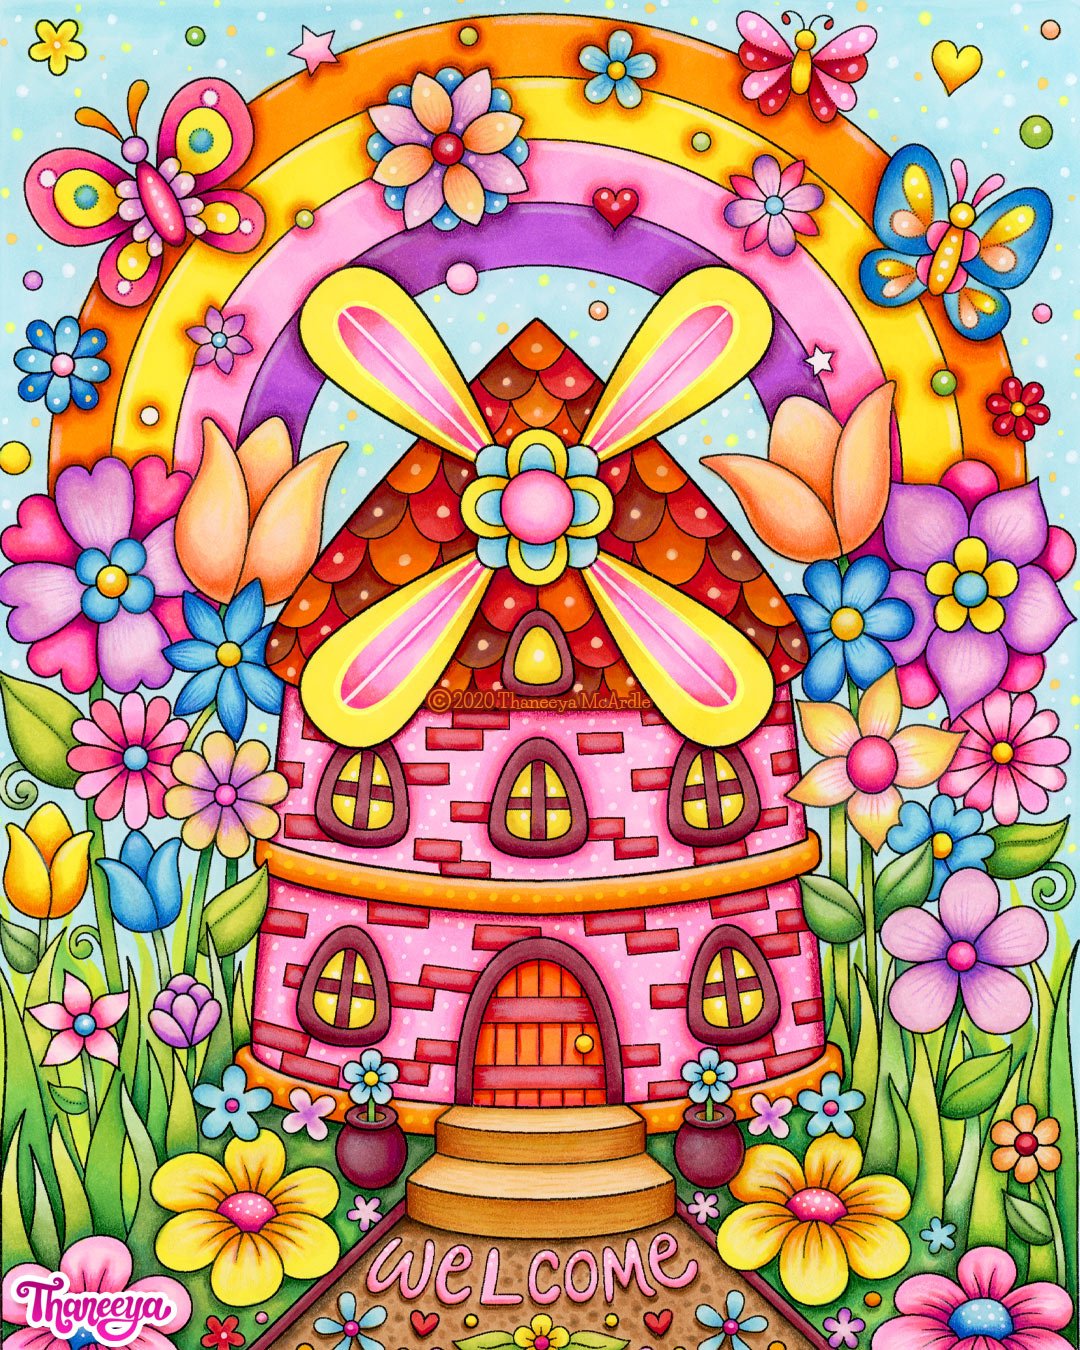 Whimsical windmill coloring page by Thaneeya McArdle